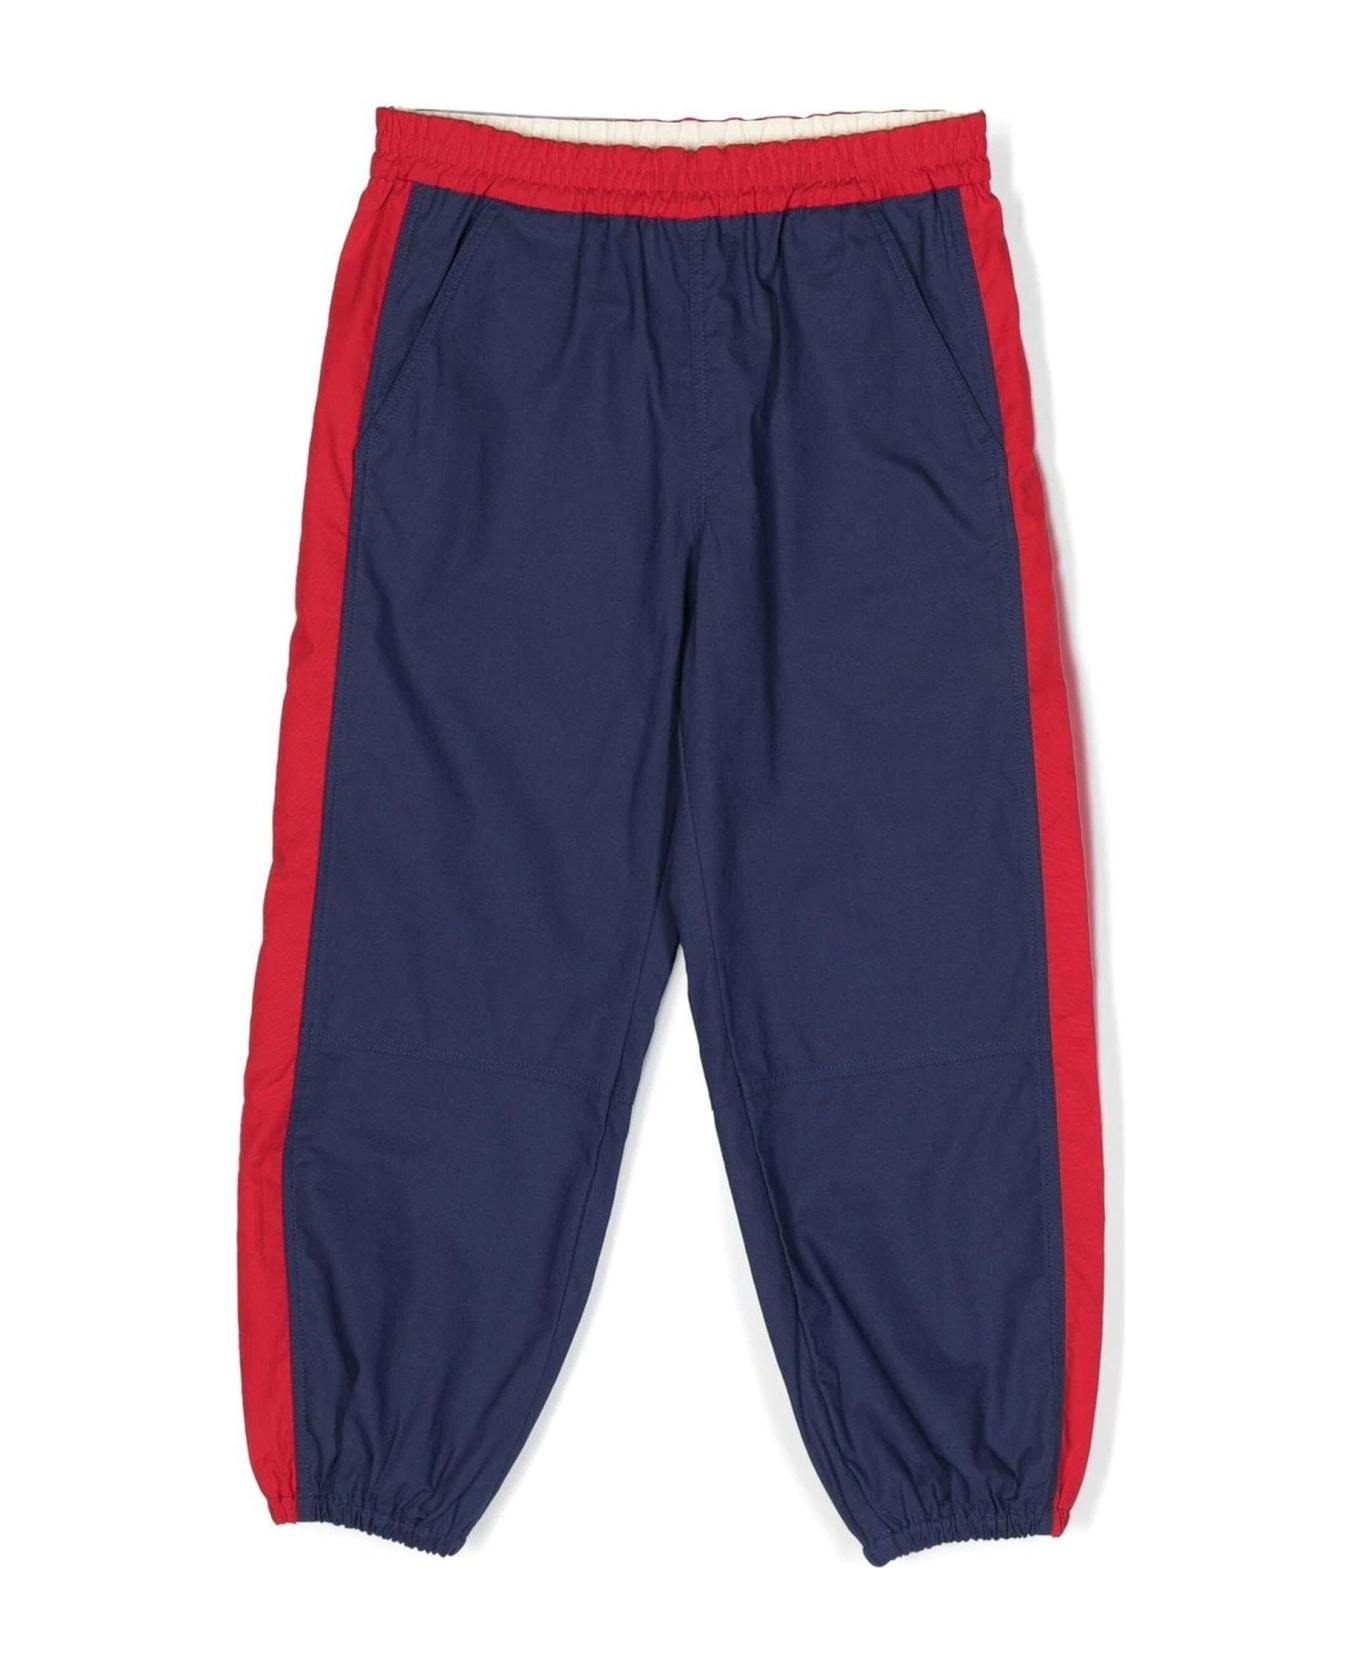 Gucci Red And Blue Track Pants - Blu+rosso